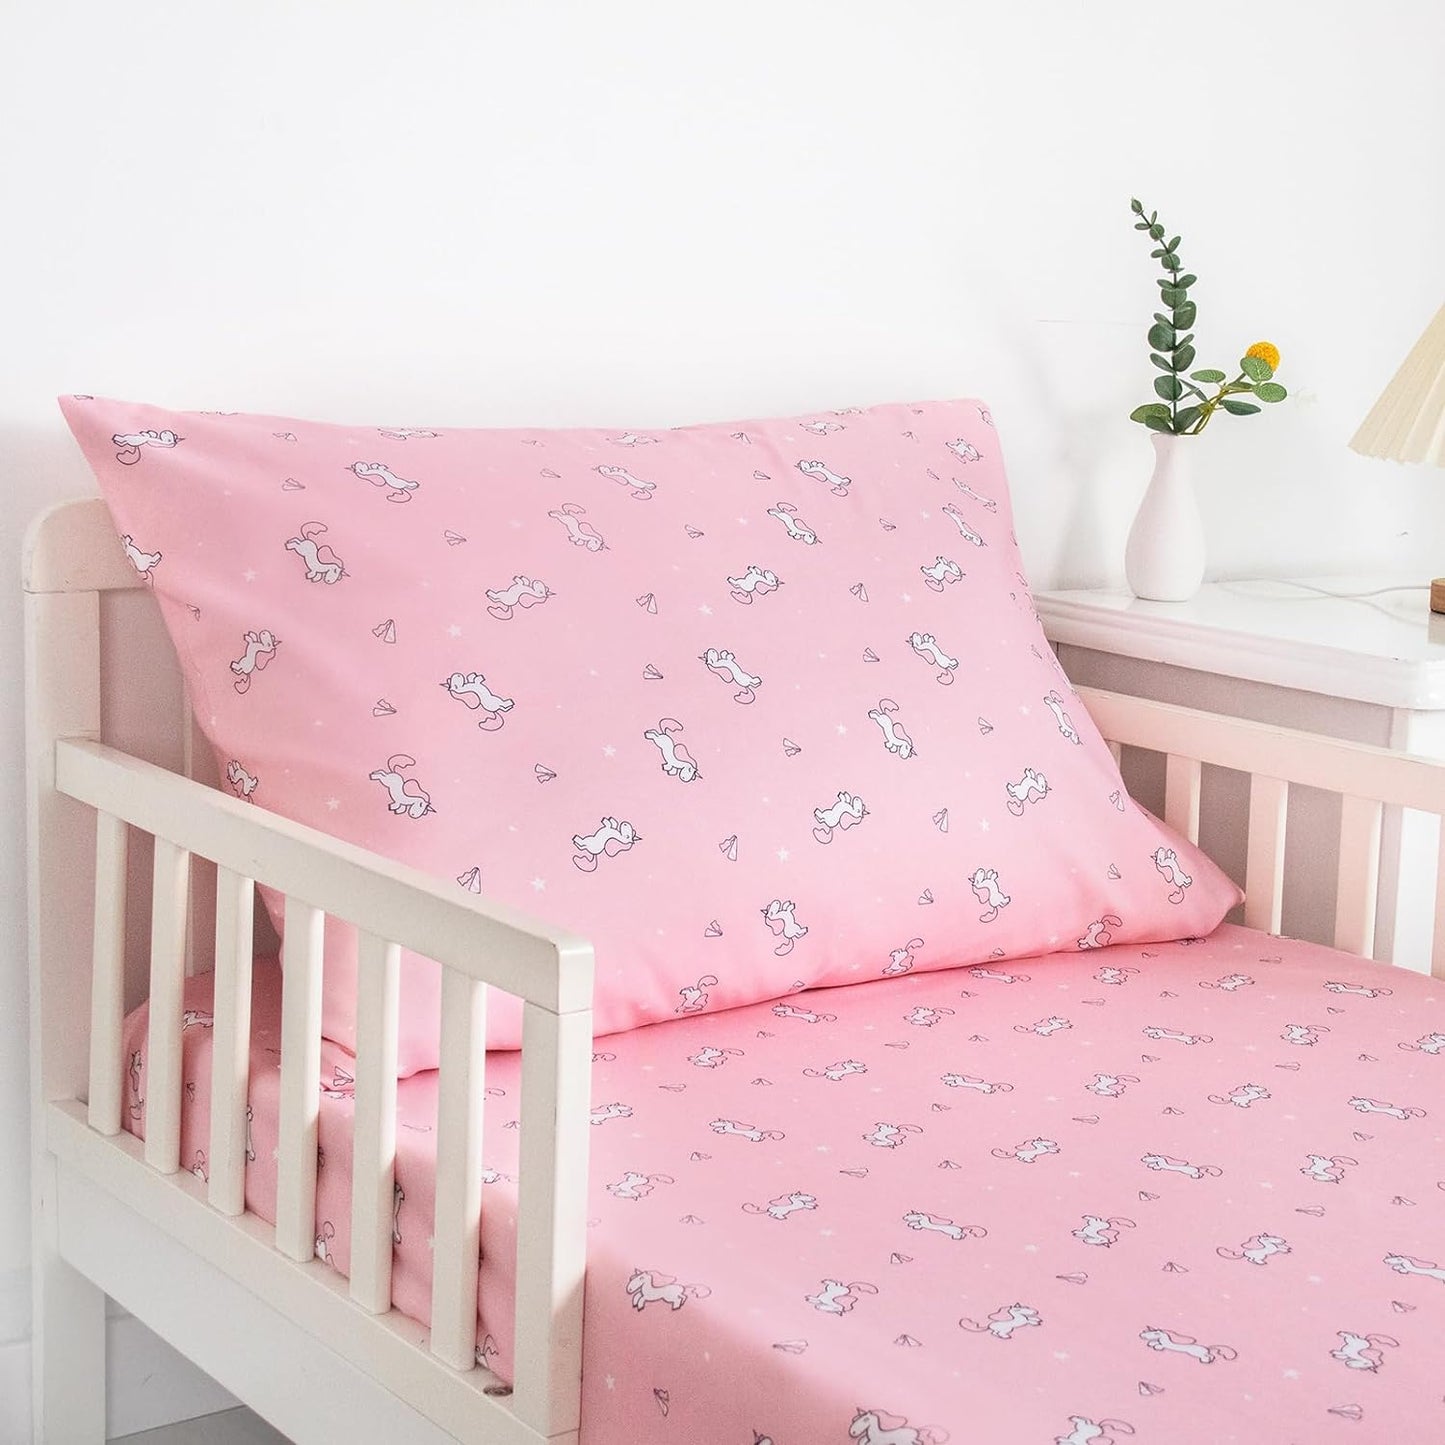 Toddler Bedding Set - 2 Pieces, Includes a Crib Fitted Sheet and Envelope Pillowcase, Soft and Breathable, Pink Horse - Biloban Online Store